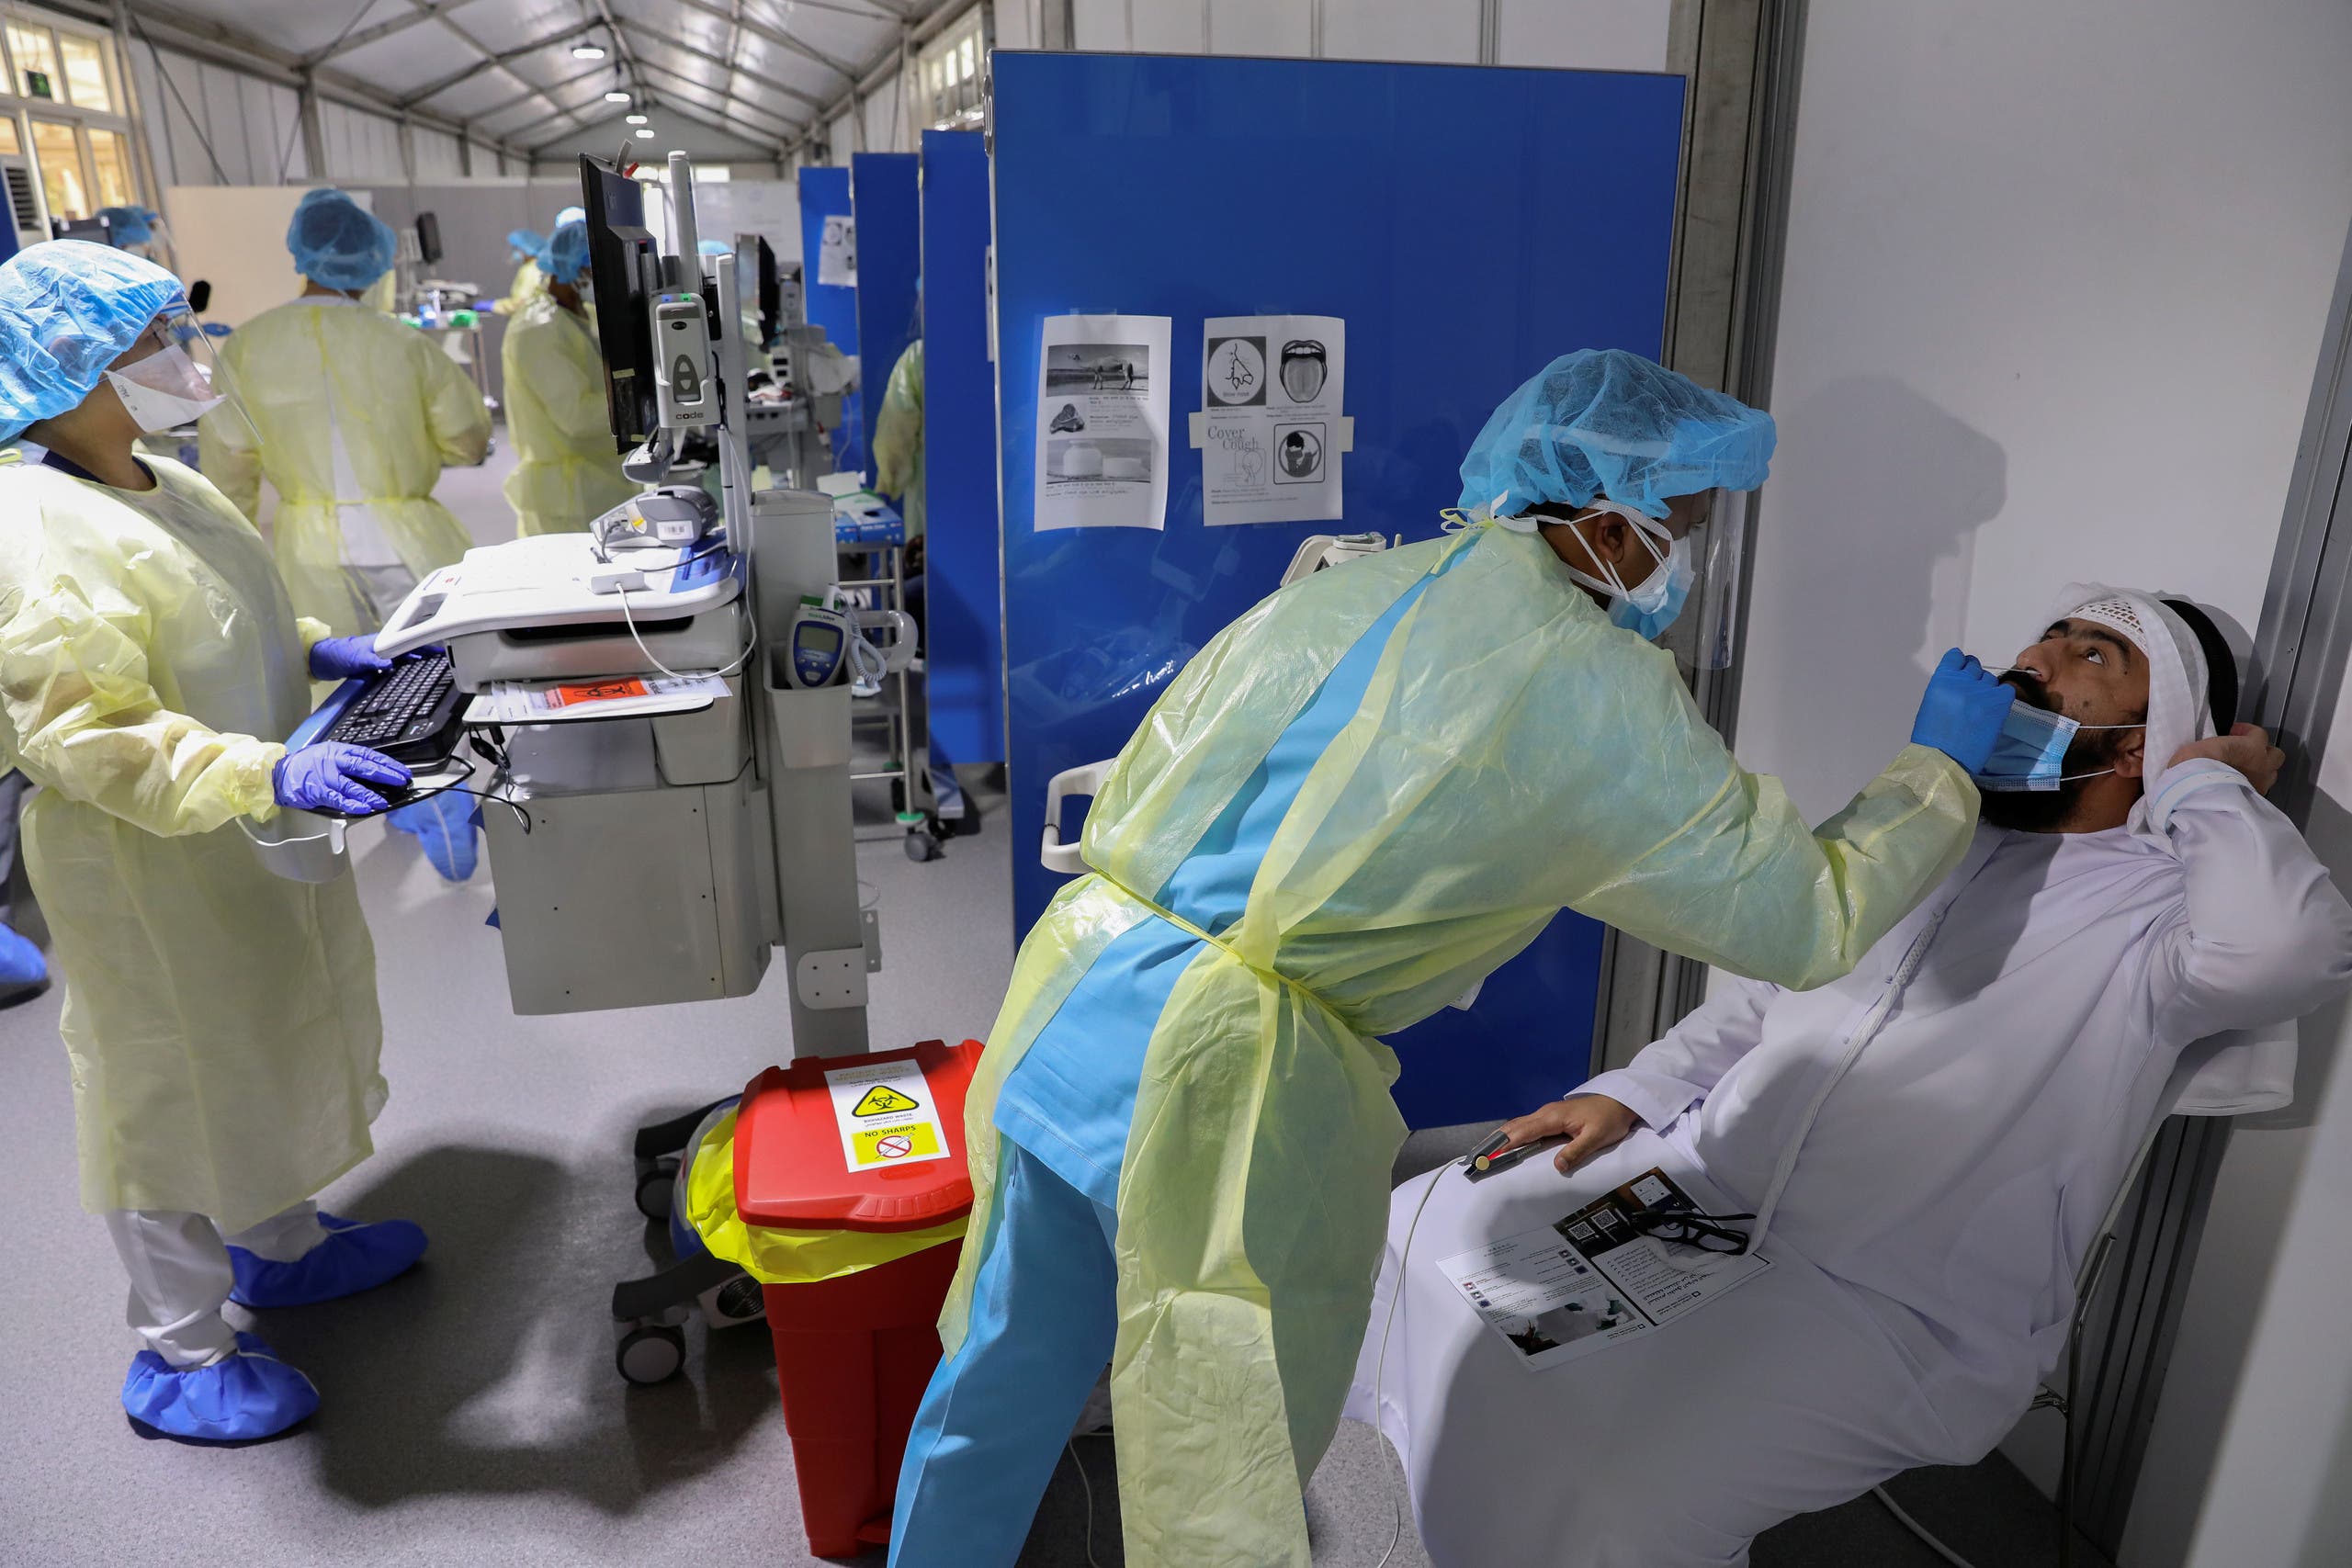 A member of medical staff wearing protective equipment swabs a man during testing, amid the coronavirus disease (COVID-19) outbreak, at a UAE hospital (File photo: Reuters)